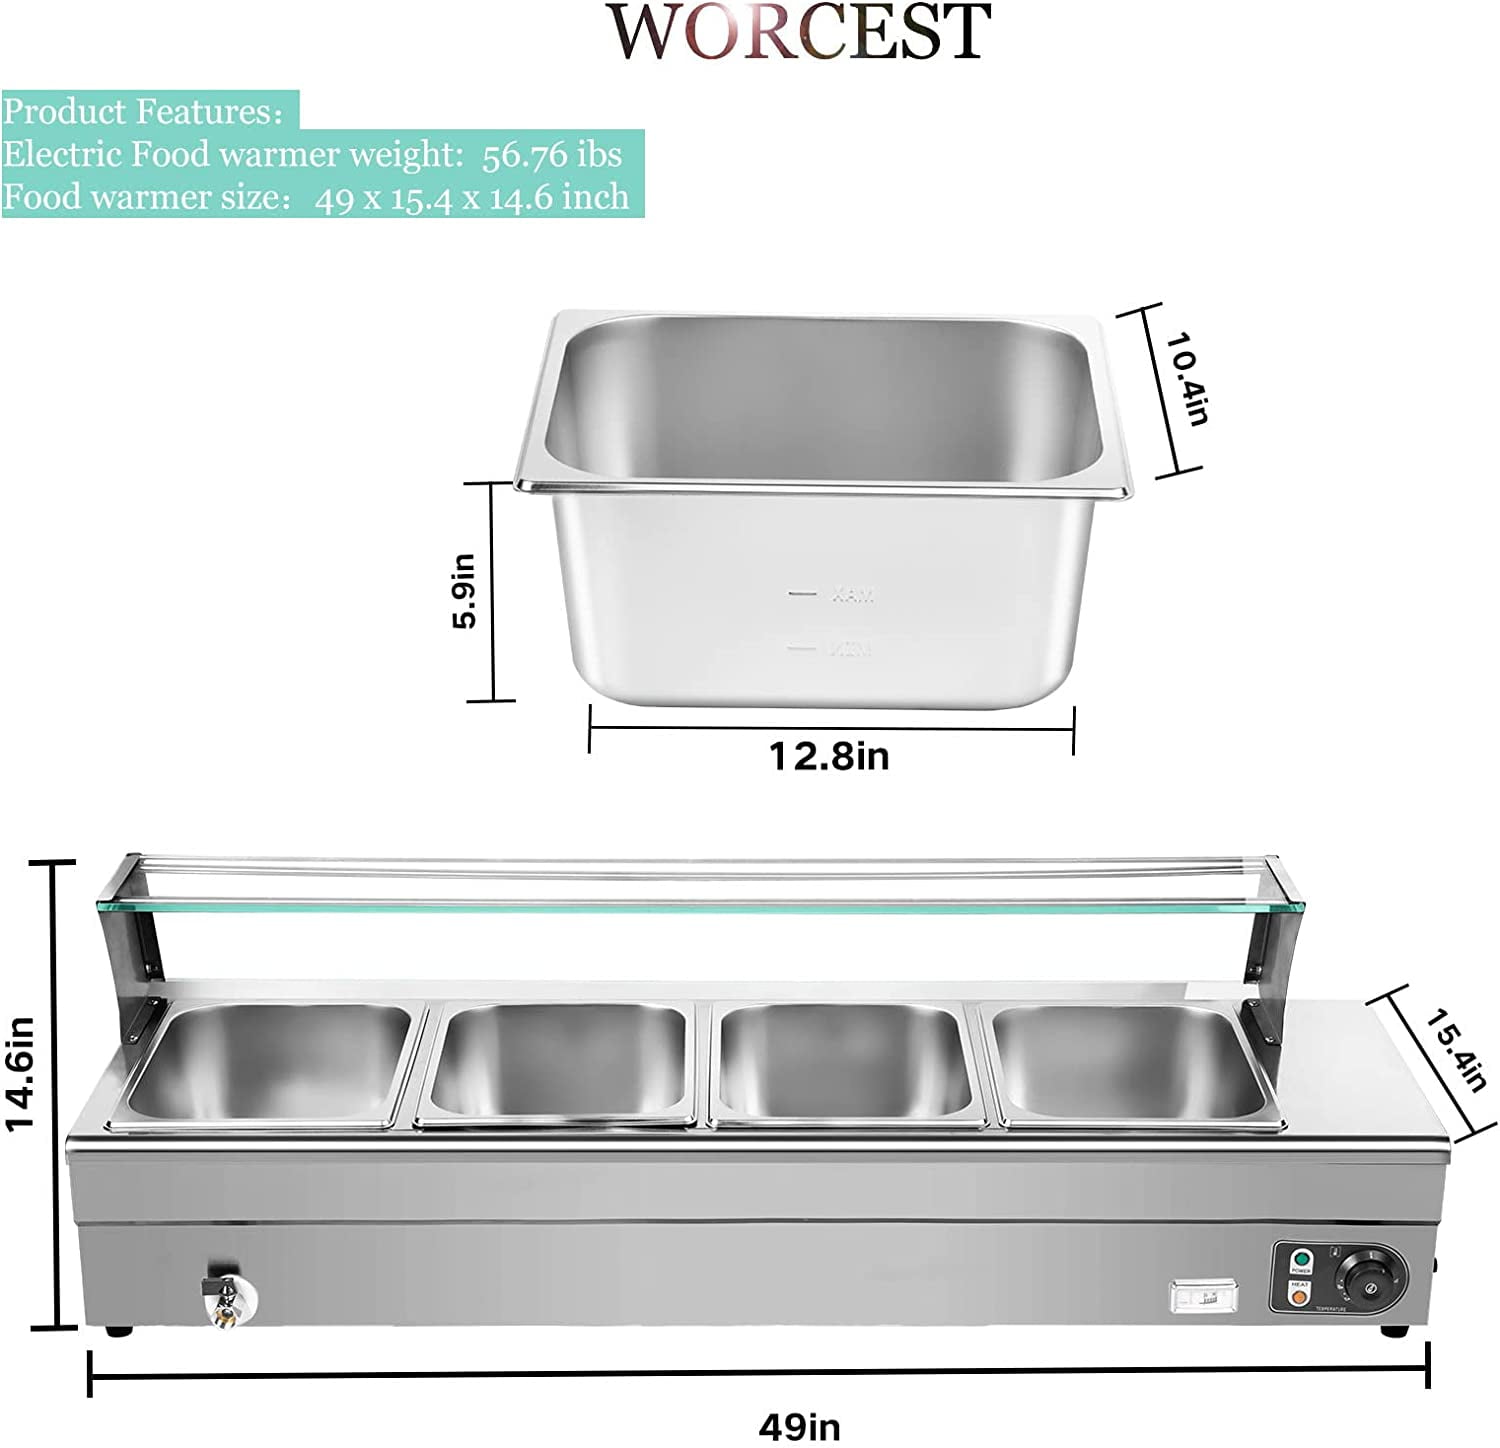  Worcest 4-Pan Commercial Food Warmer 110v 1500w Electric  Stainless Steel Bain Steam Table Food Warmer with Large Capacity Pans for  Catering and Parties Restaurants Business Occasion (110v 4-Pan): Industrial  & Scientific